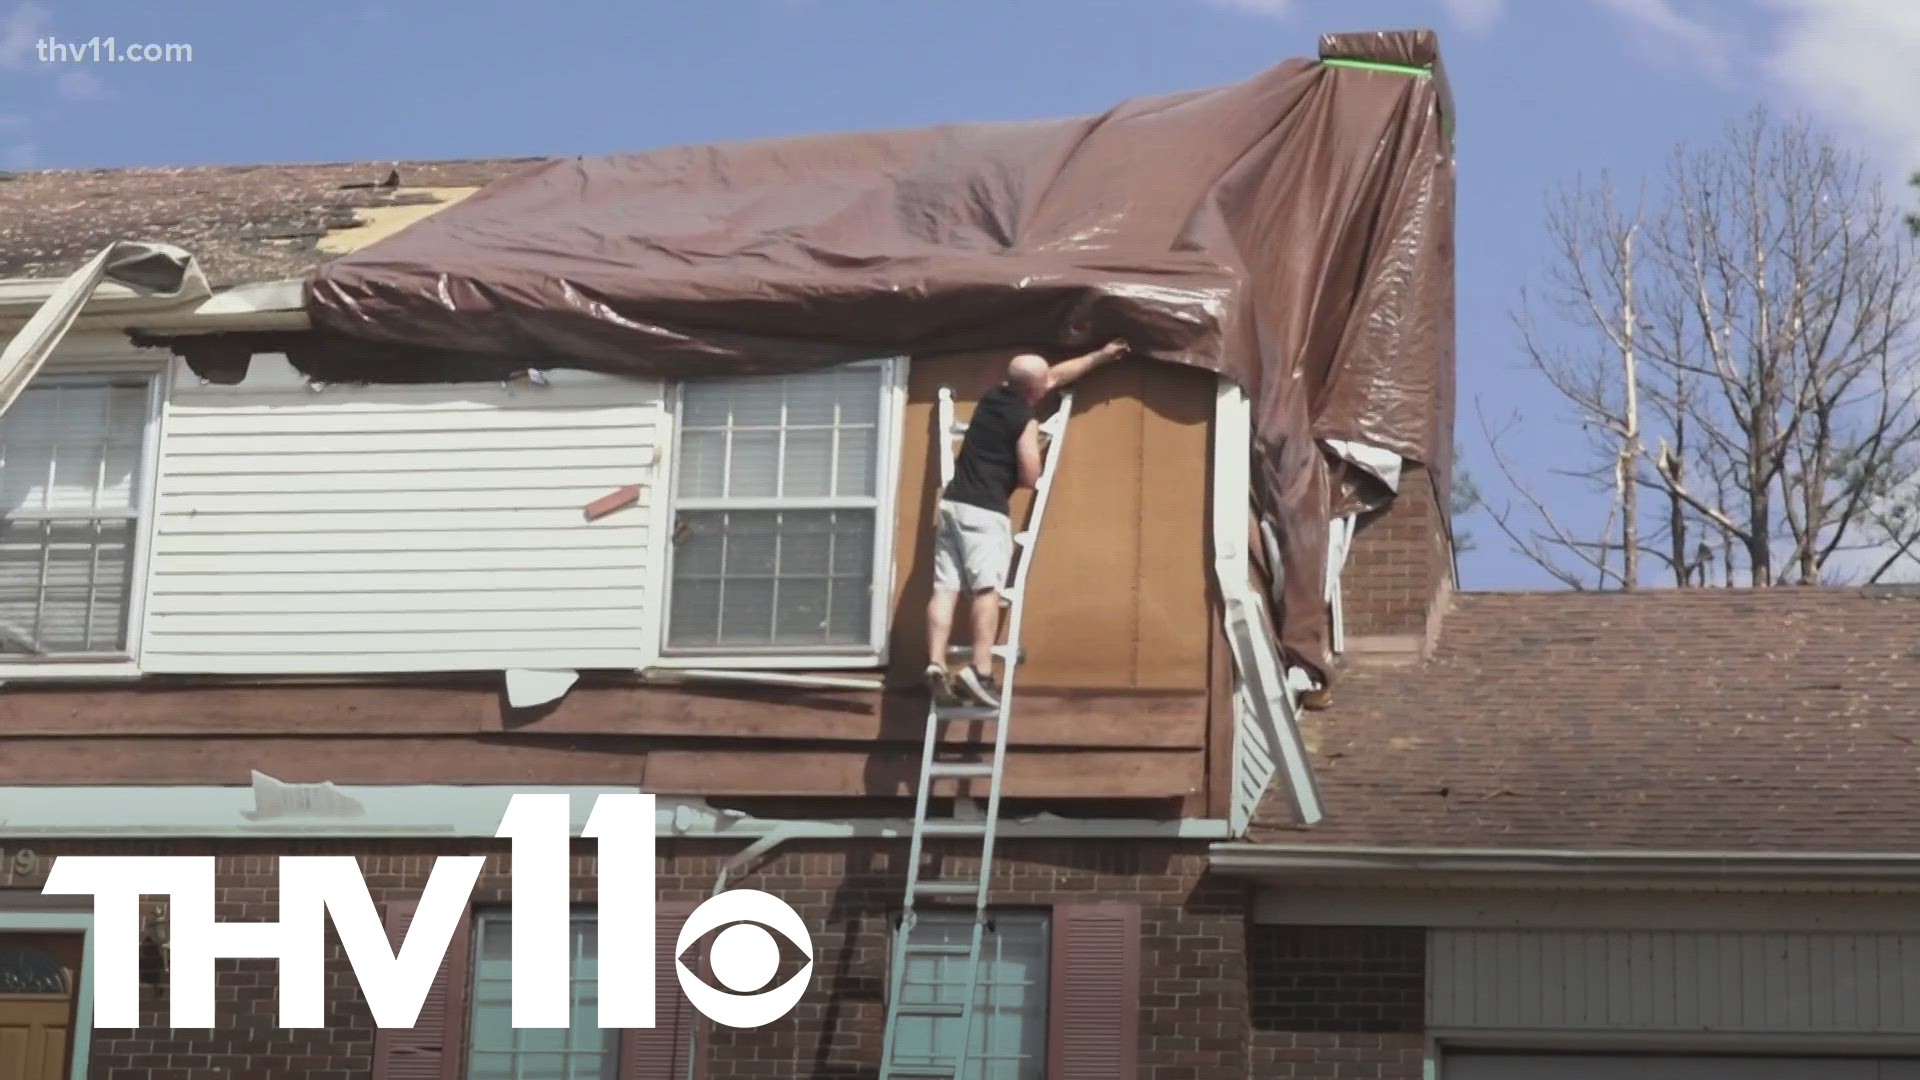 Everywhere you look in the hardest hit areas, you will notice that there are hundreds of damaged roofs— one company is lending a helping hand to those in need.